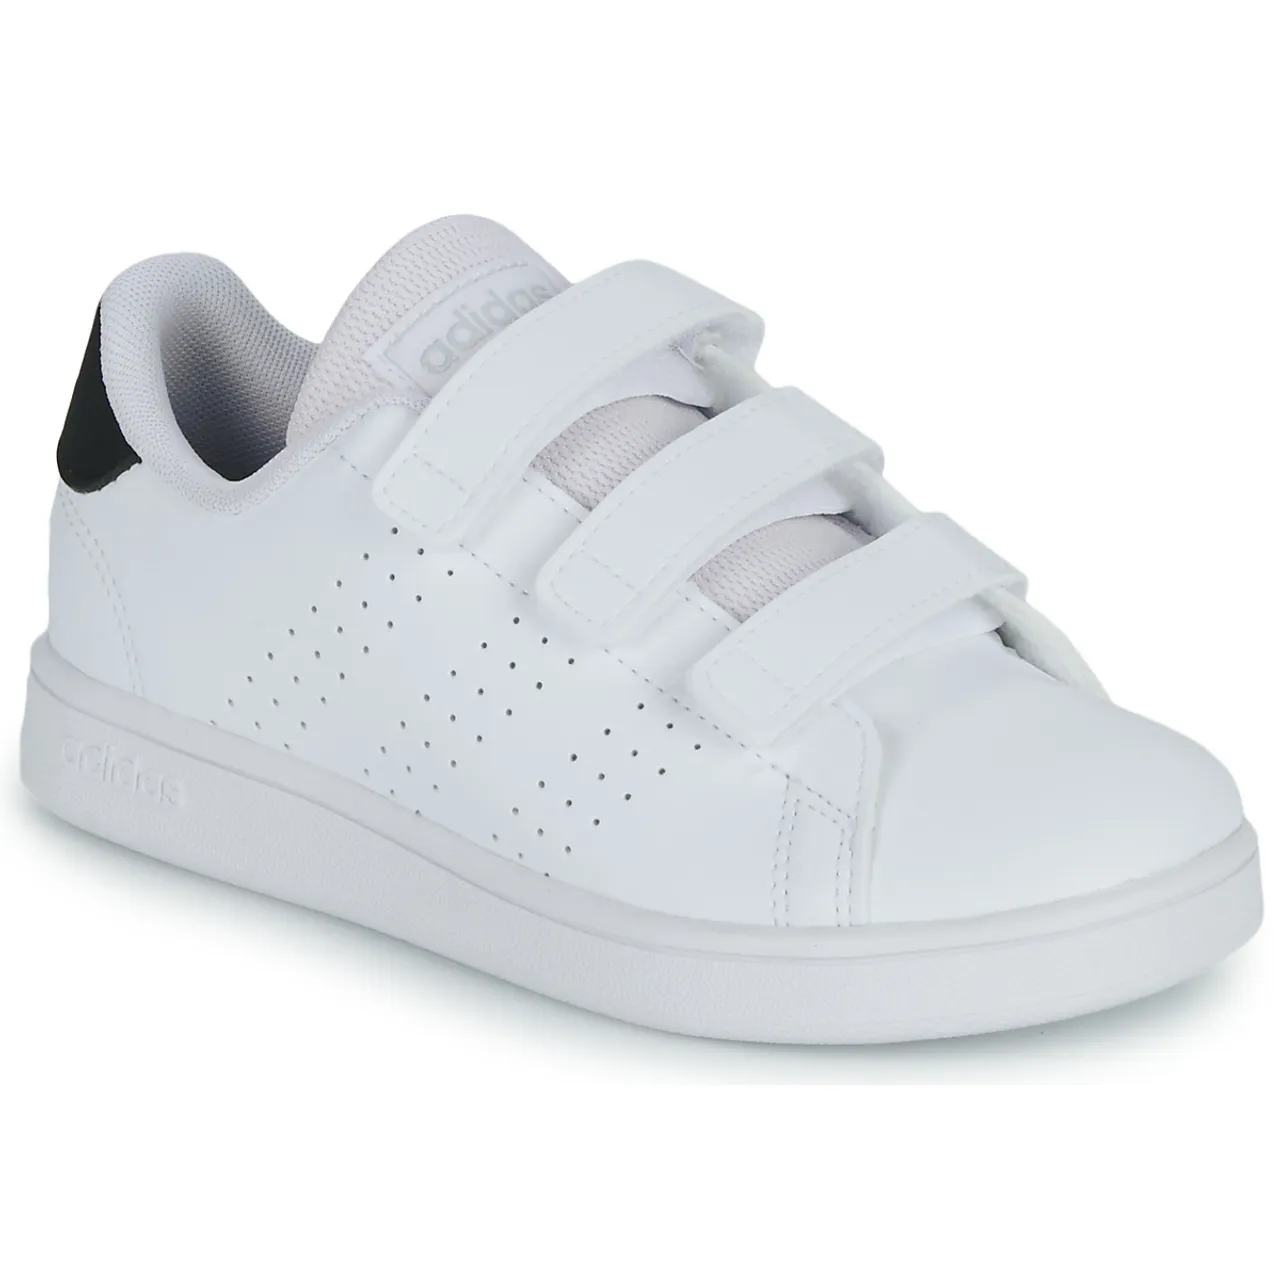 adidas  ADVANTAGE CF C  boys's Children's Shoes (Trainers) in White